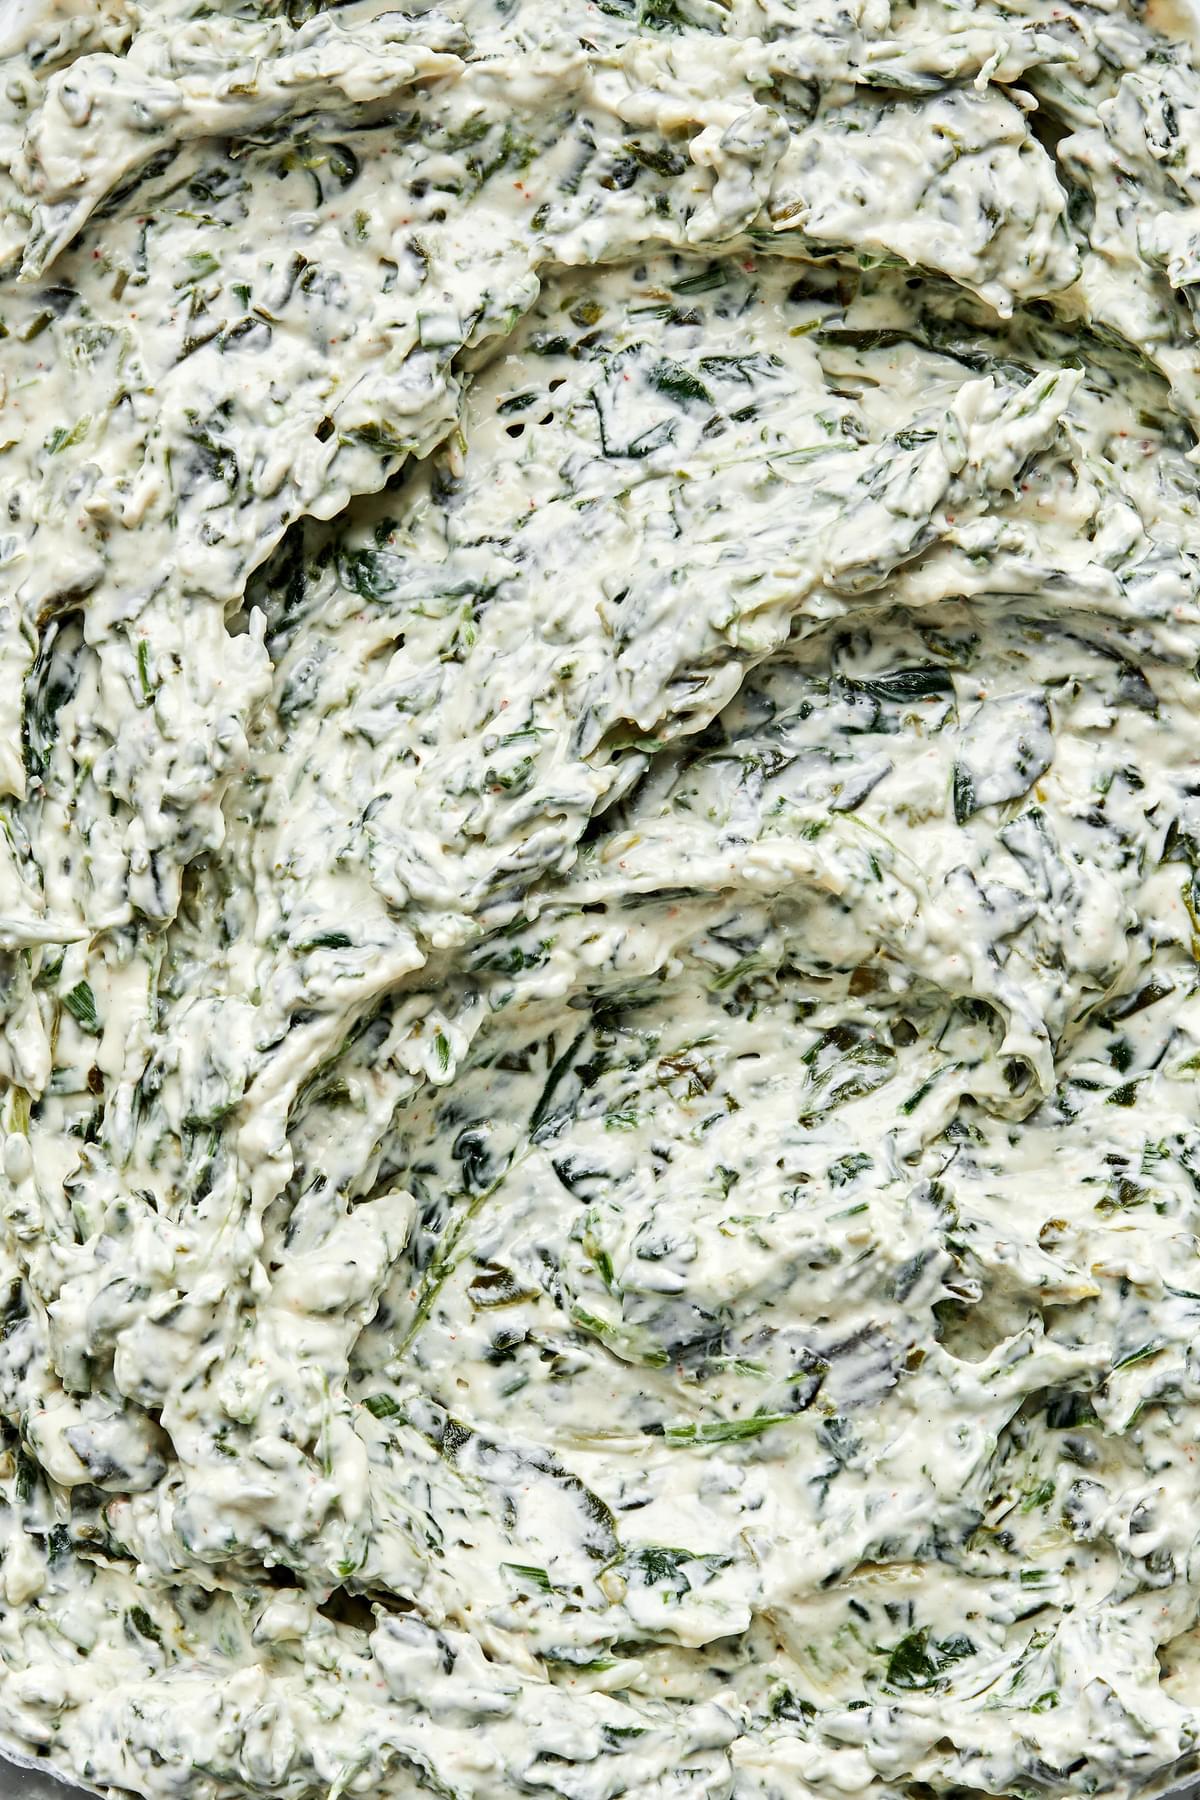 homemade spinach dip made with sour cream, mayonnaise, spinach, spices, worcestershire, dijon and chives